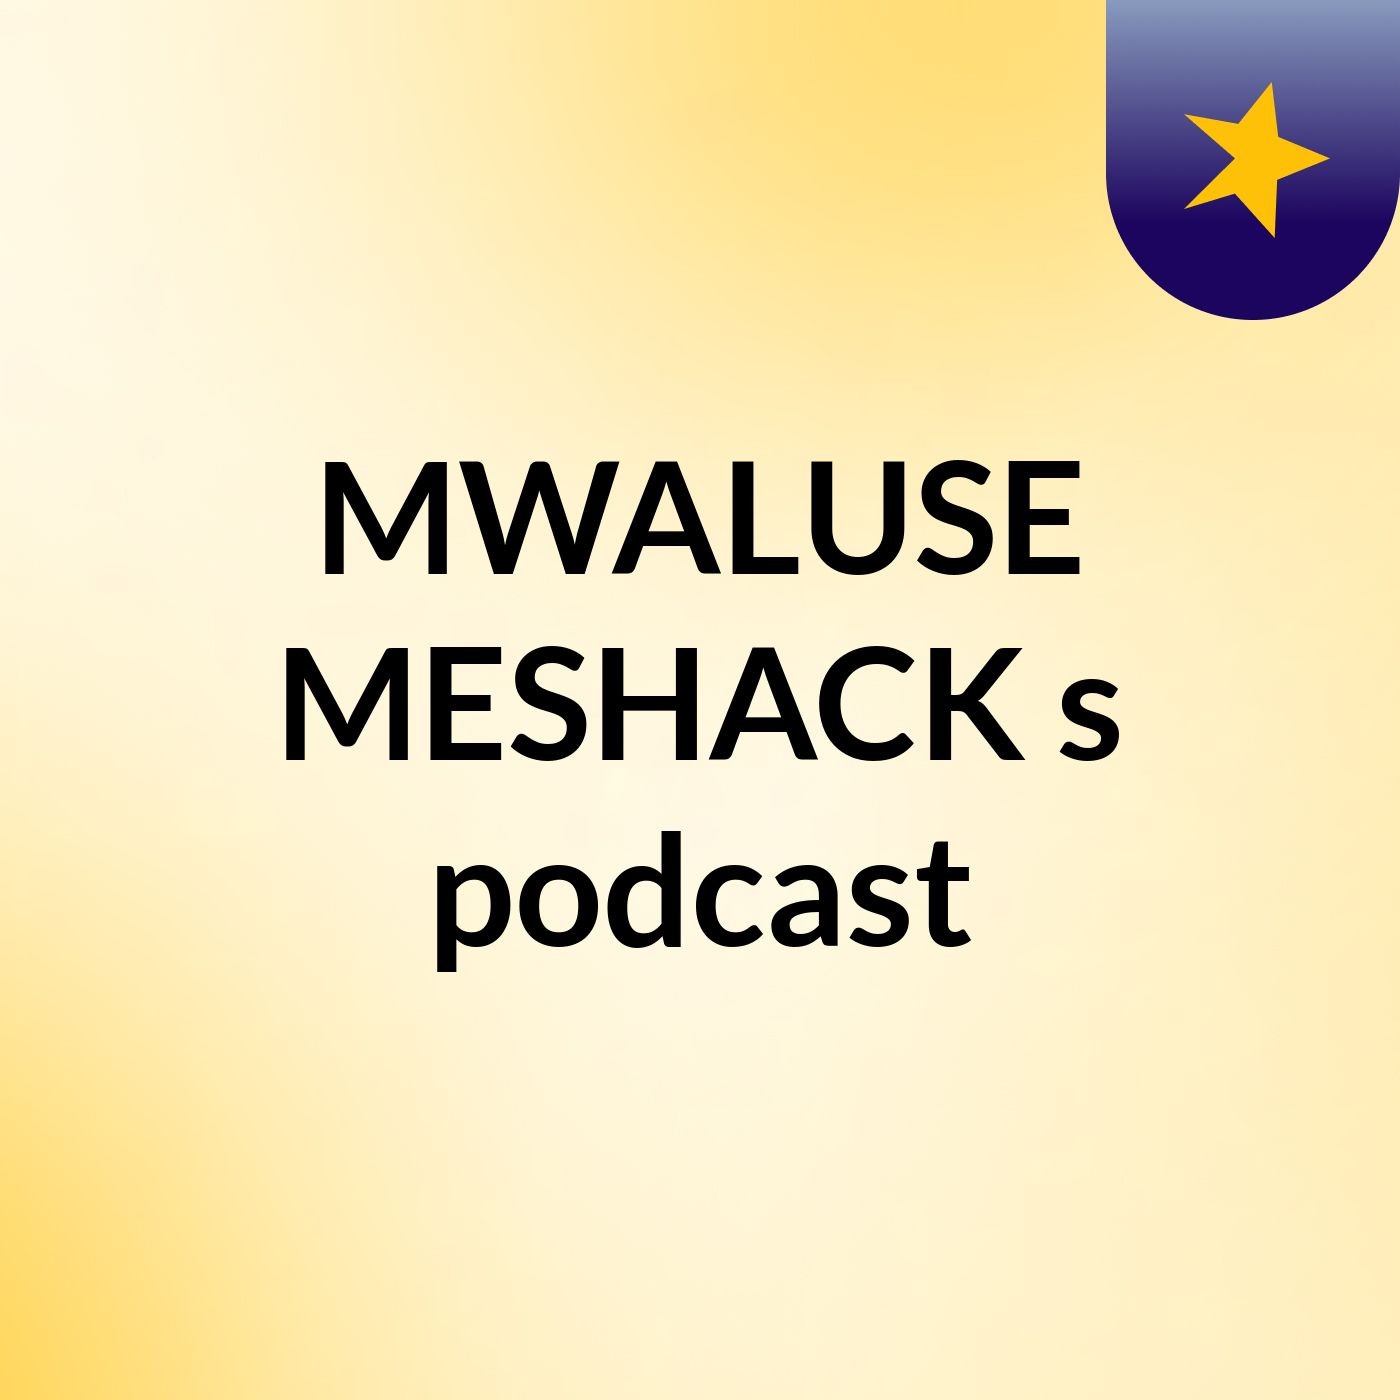 MWALUSE MESHACK's podcast